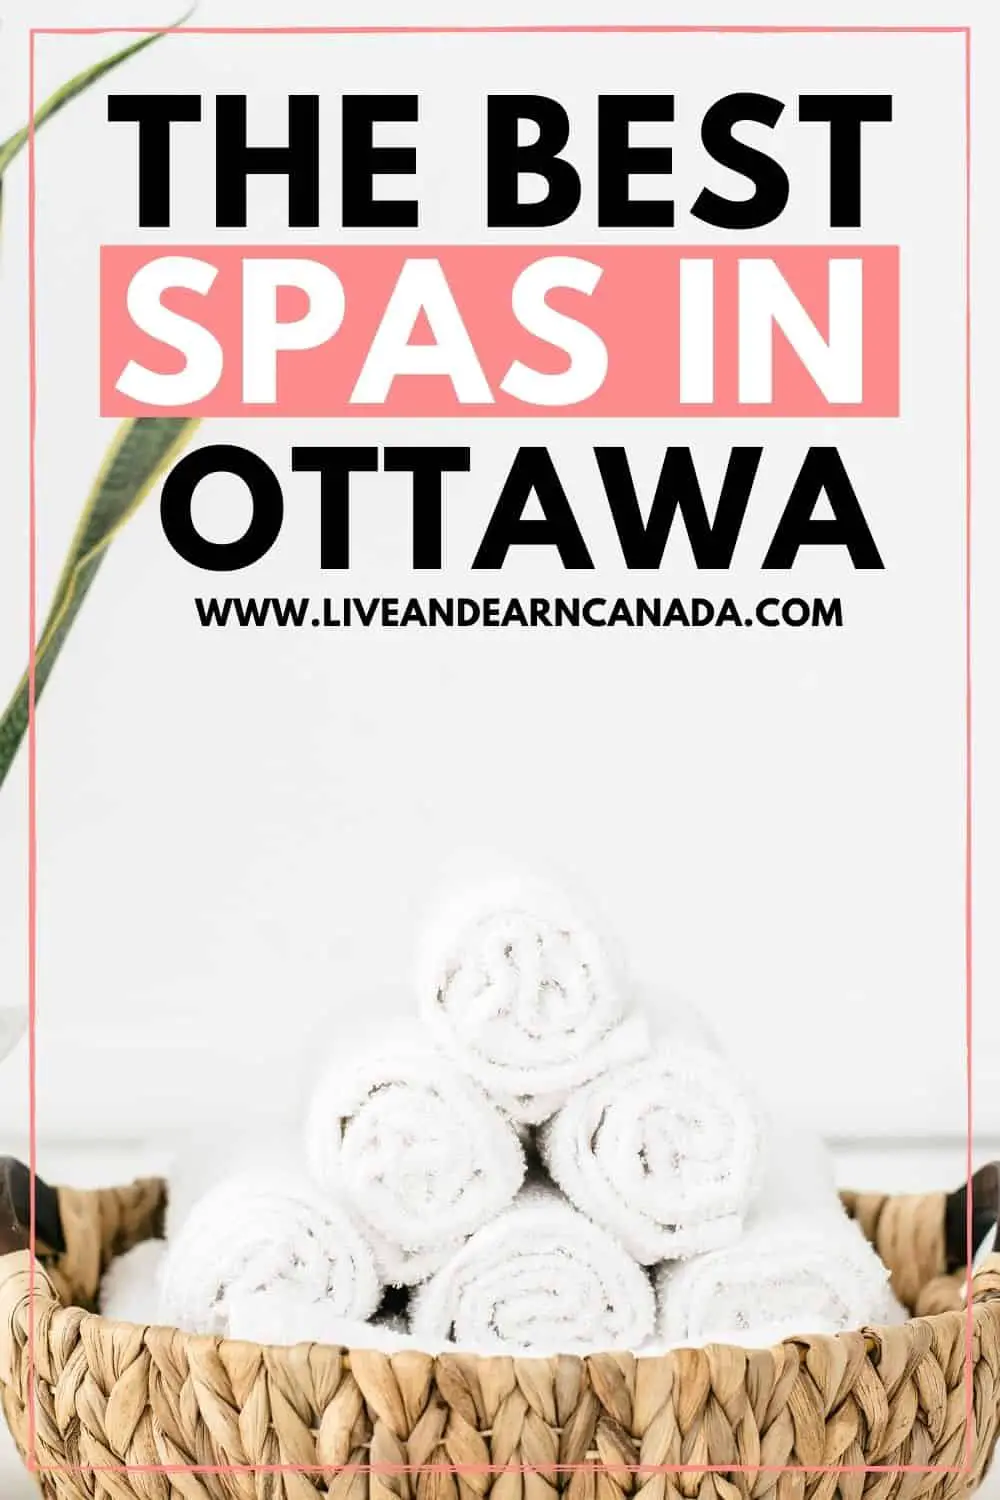 Are you looking for great things to do in Ottawa? Why not visit some of Ottawa's Spas. You can explore the best Spas in Ottawa today by visiting what we recommend. Check out the BEST SPA In Ottawa today! #Ottawaspa #spainottawa